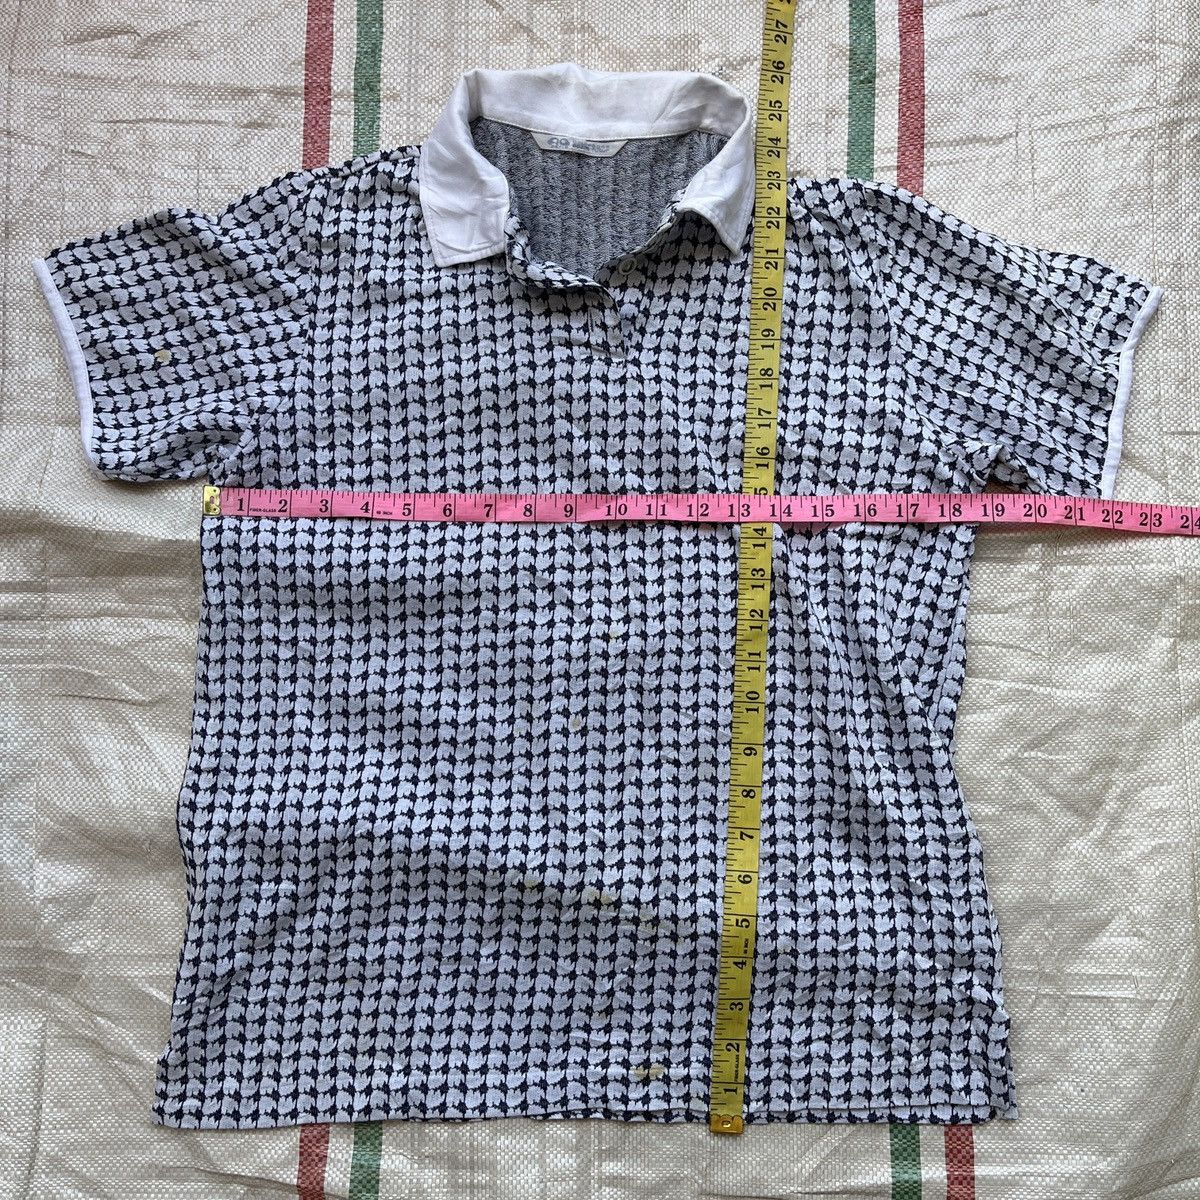 Vintage Monogram Courreges Polo Shirts Made In Japan - 6